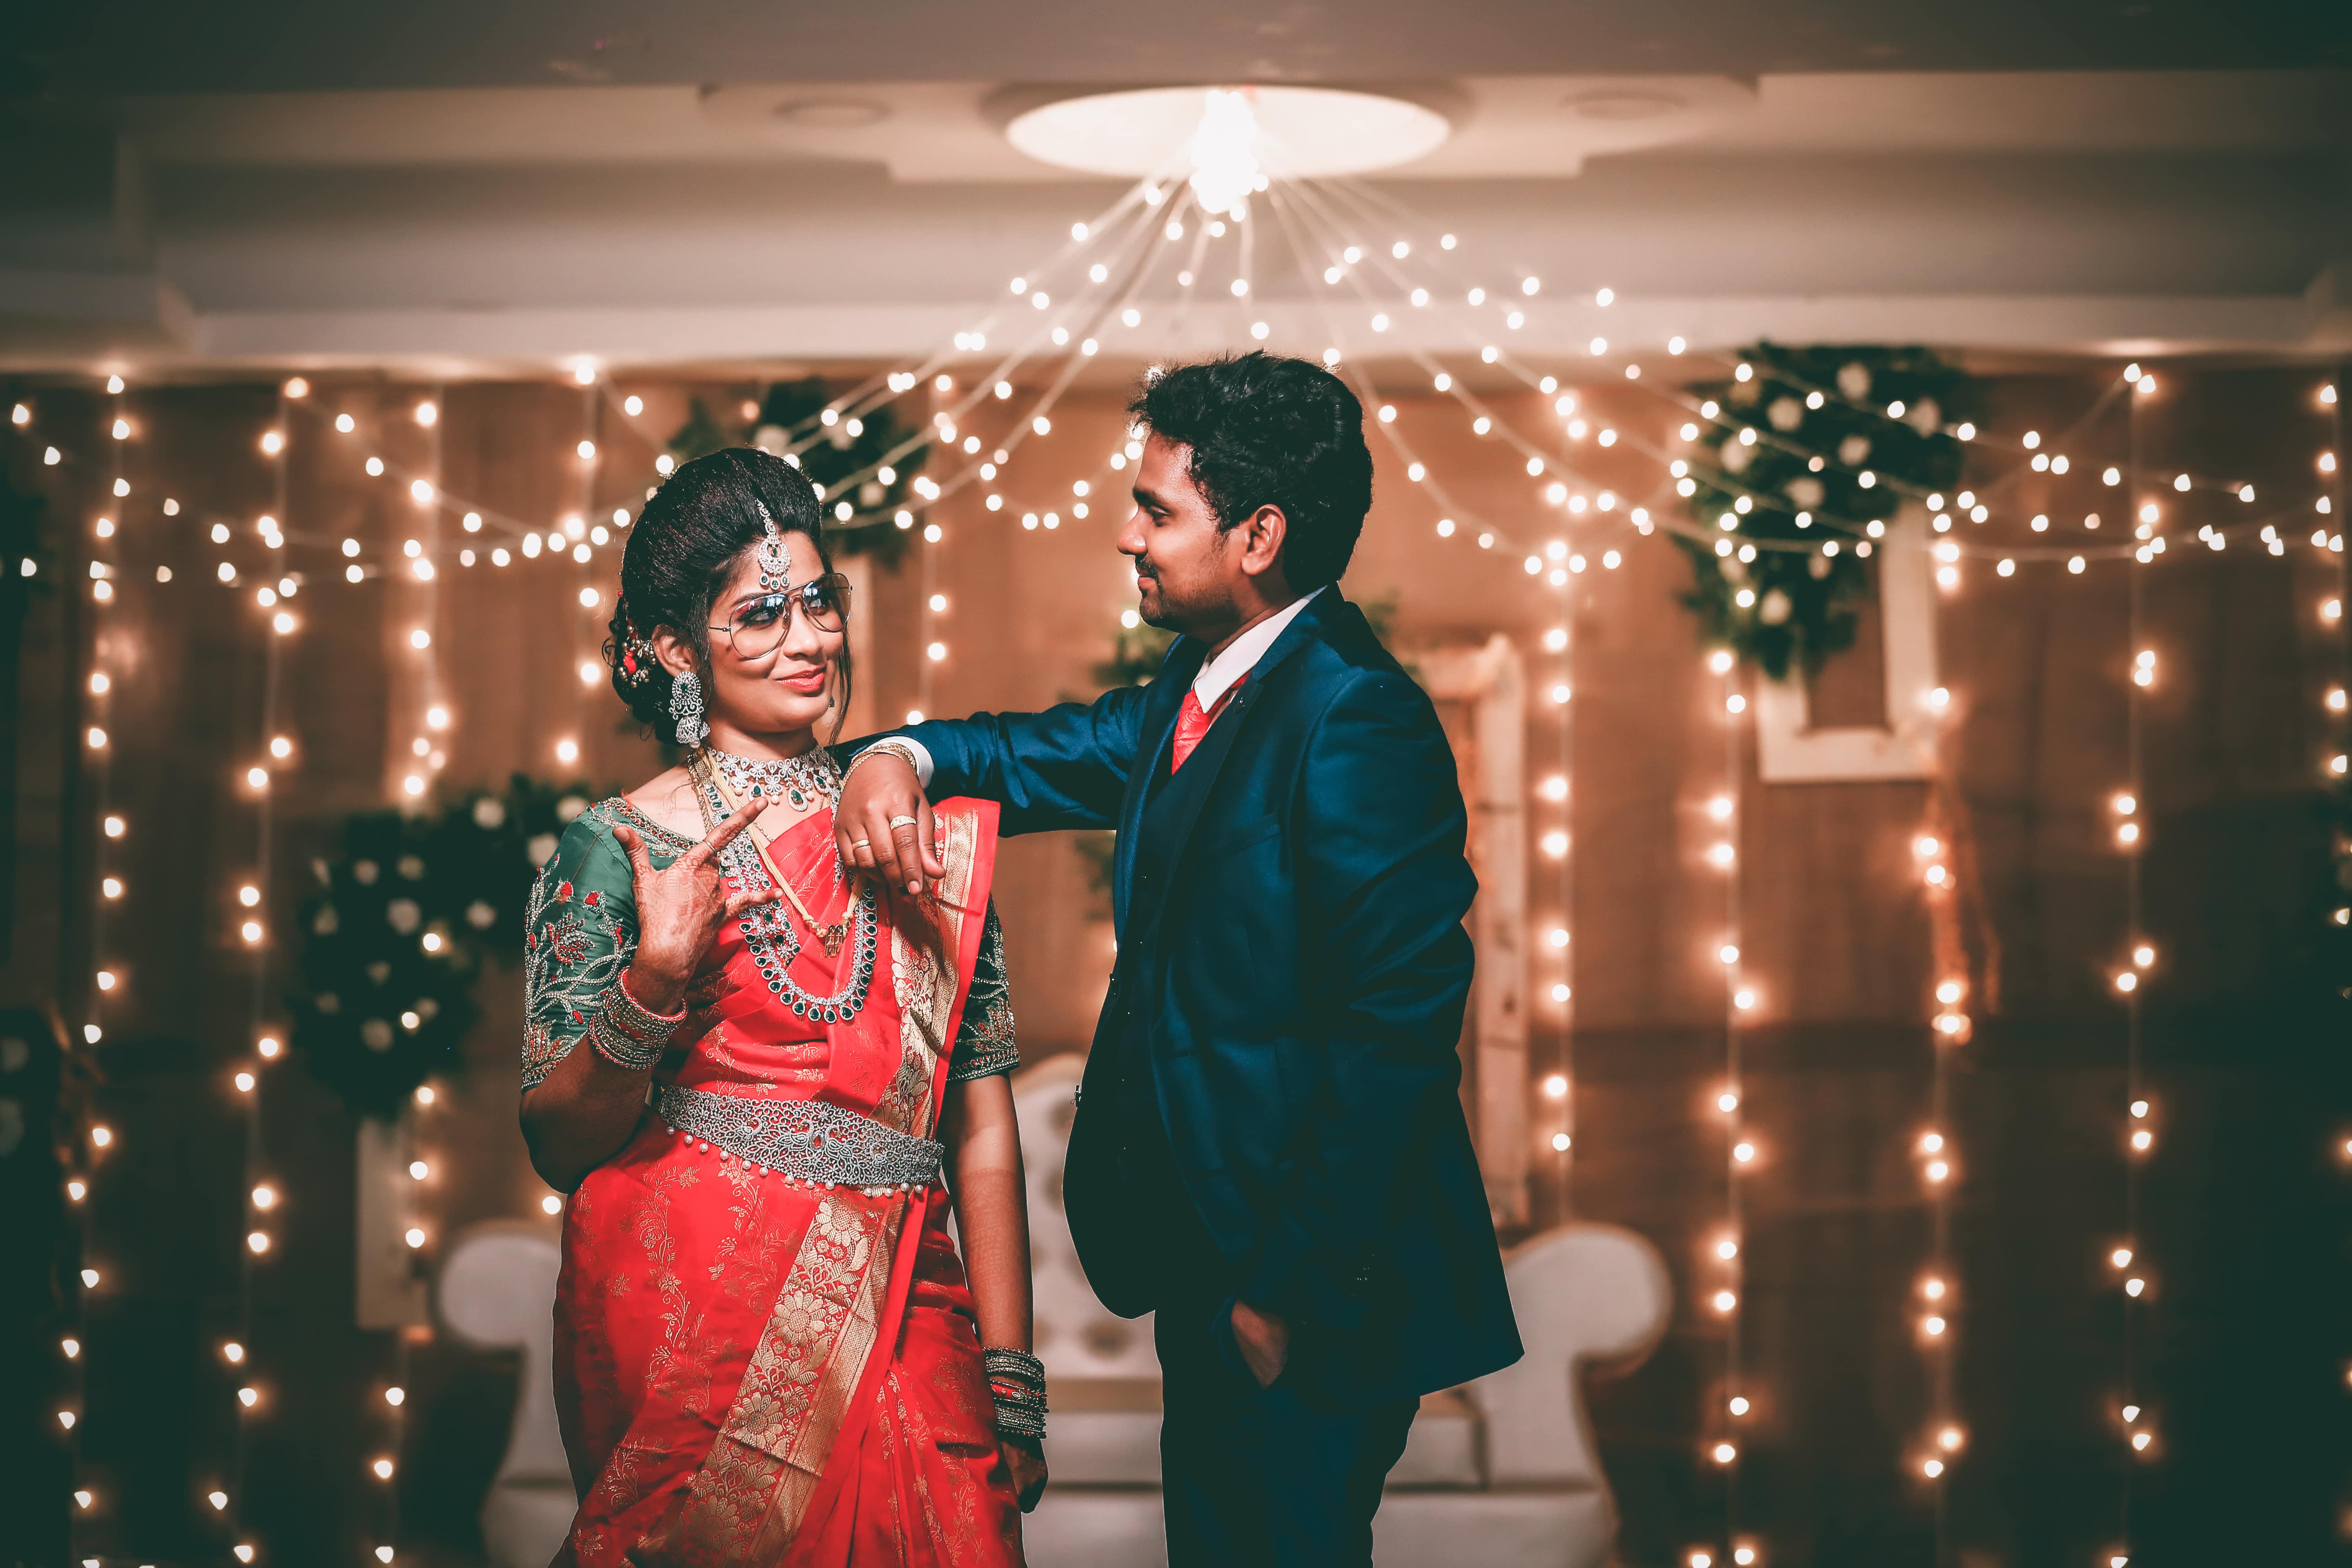 Enjoy your special day.Have lots of fun and Candid moments. Selva wedding photography Memories with Candid wedding